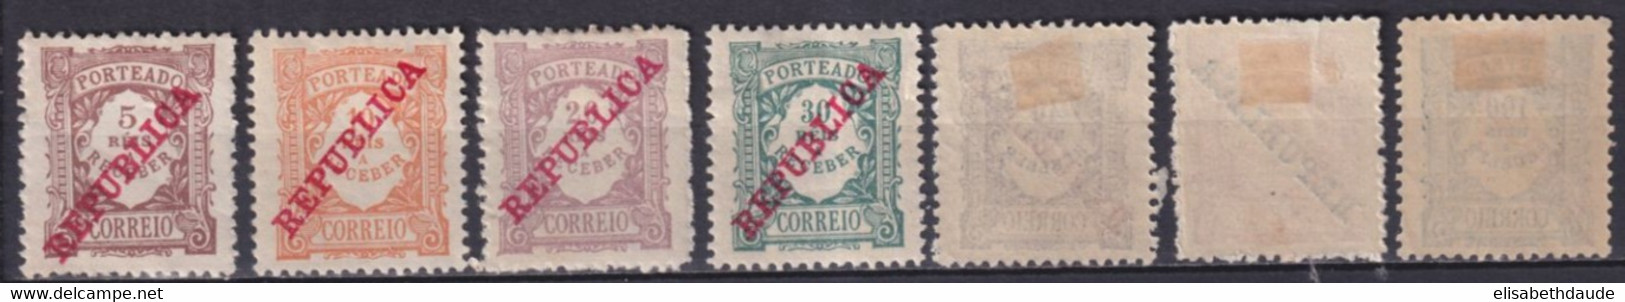 PORTUGAL - 1910 - SERIE COMPLETE TAXE YVERT N° 14/20 * MH - COTE = 20 EUR - Unused Stamps